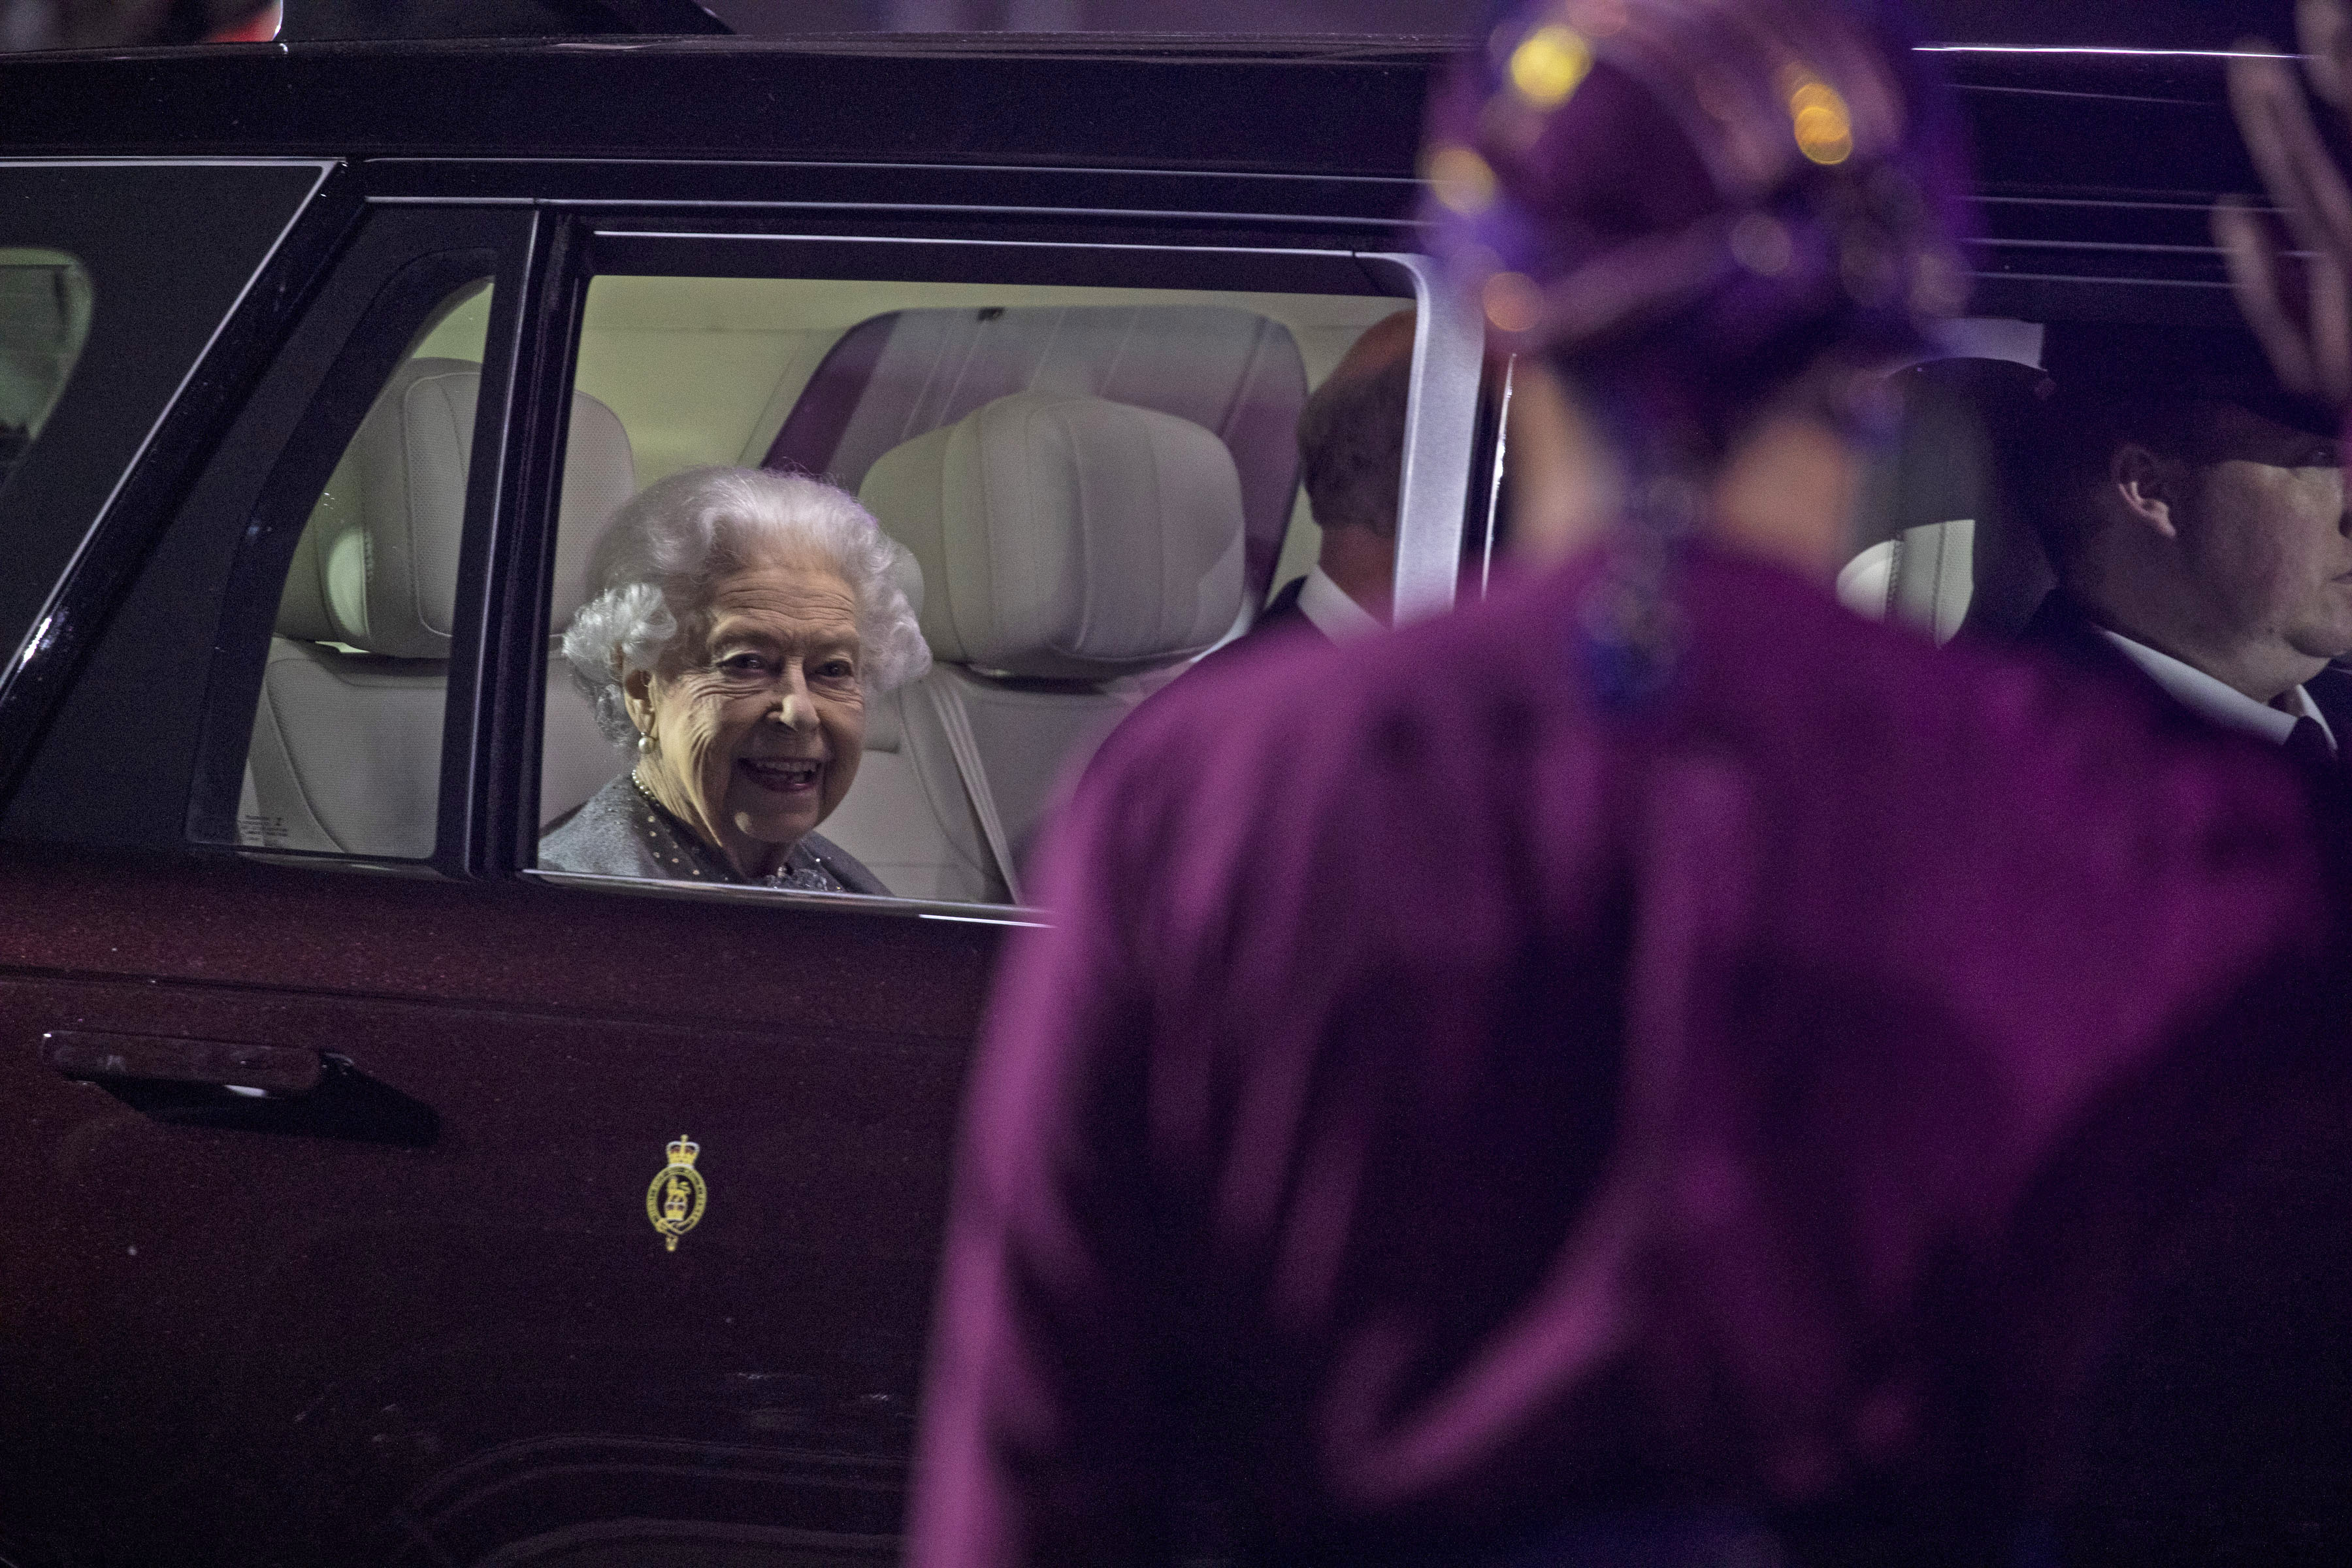 The Queen in a Royal car.